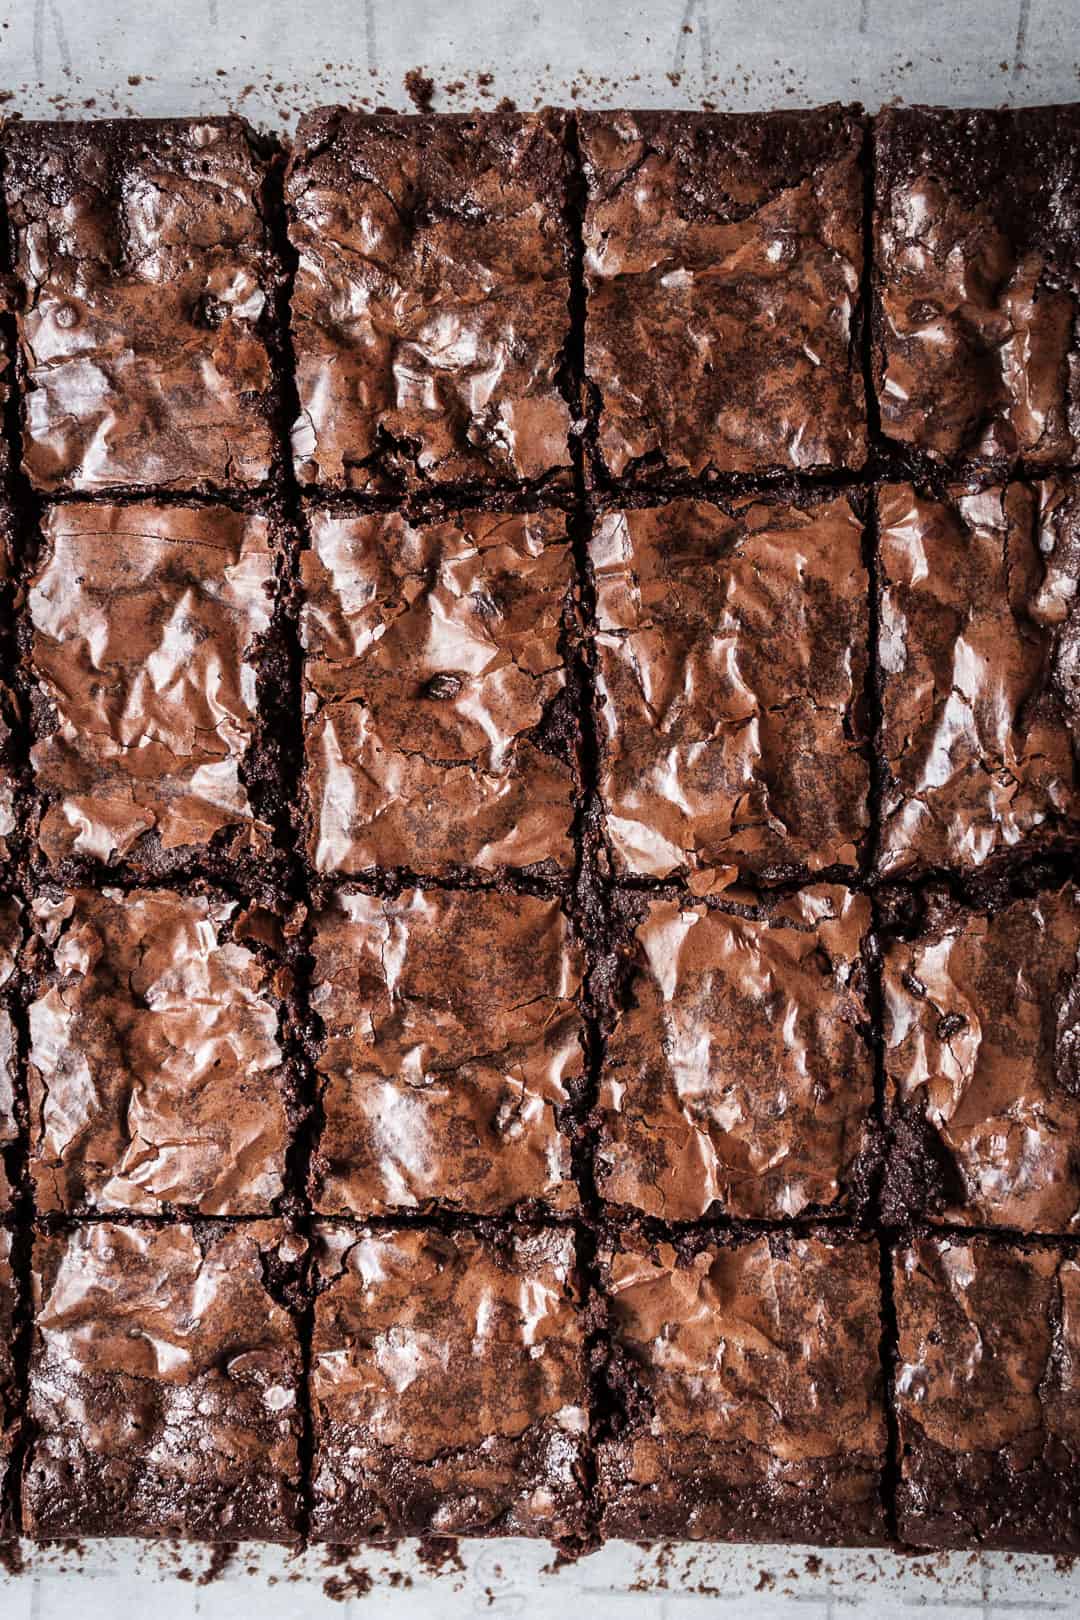 Top view close up of a grid of cut squares of brownies with port soaked cherries